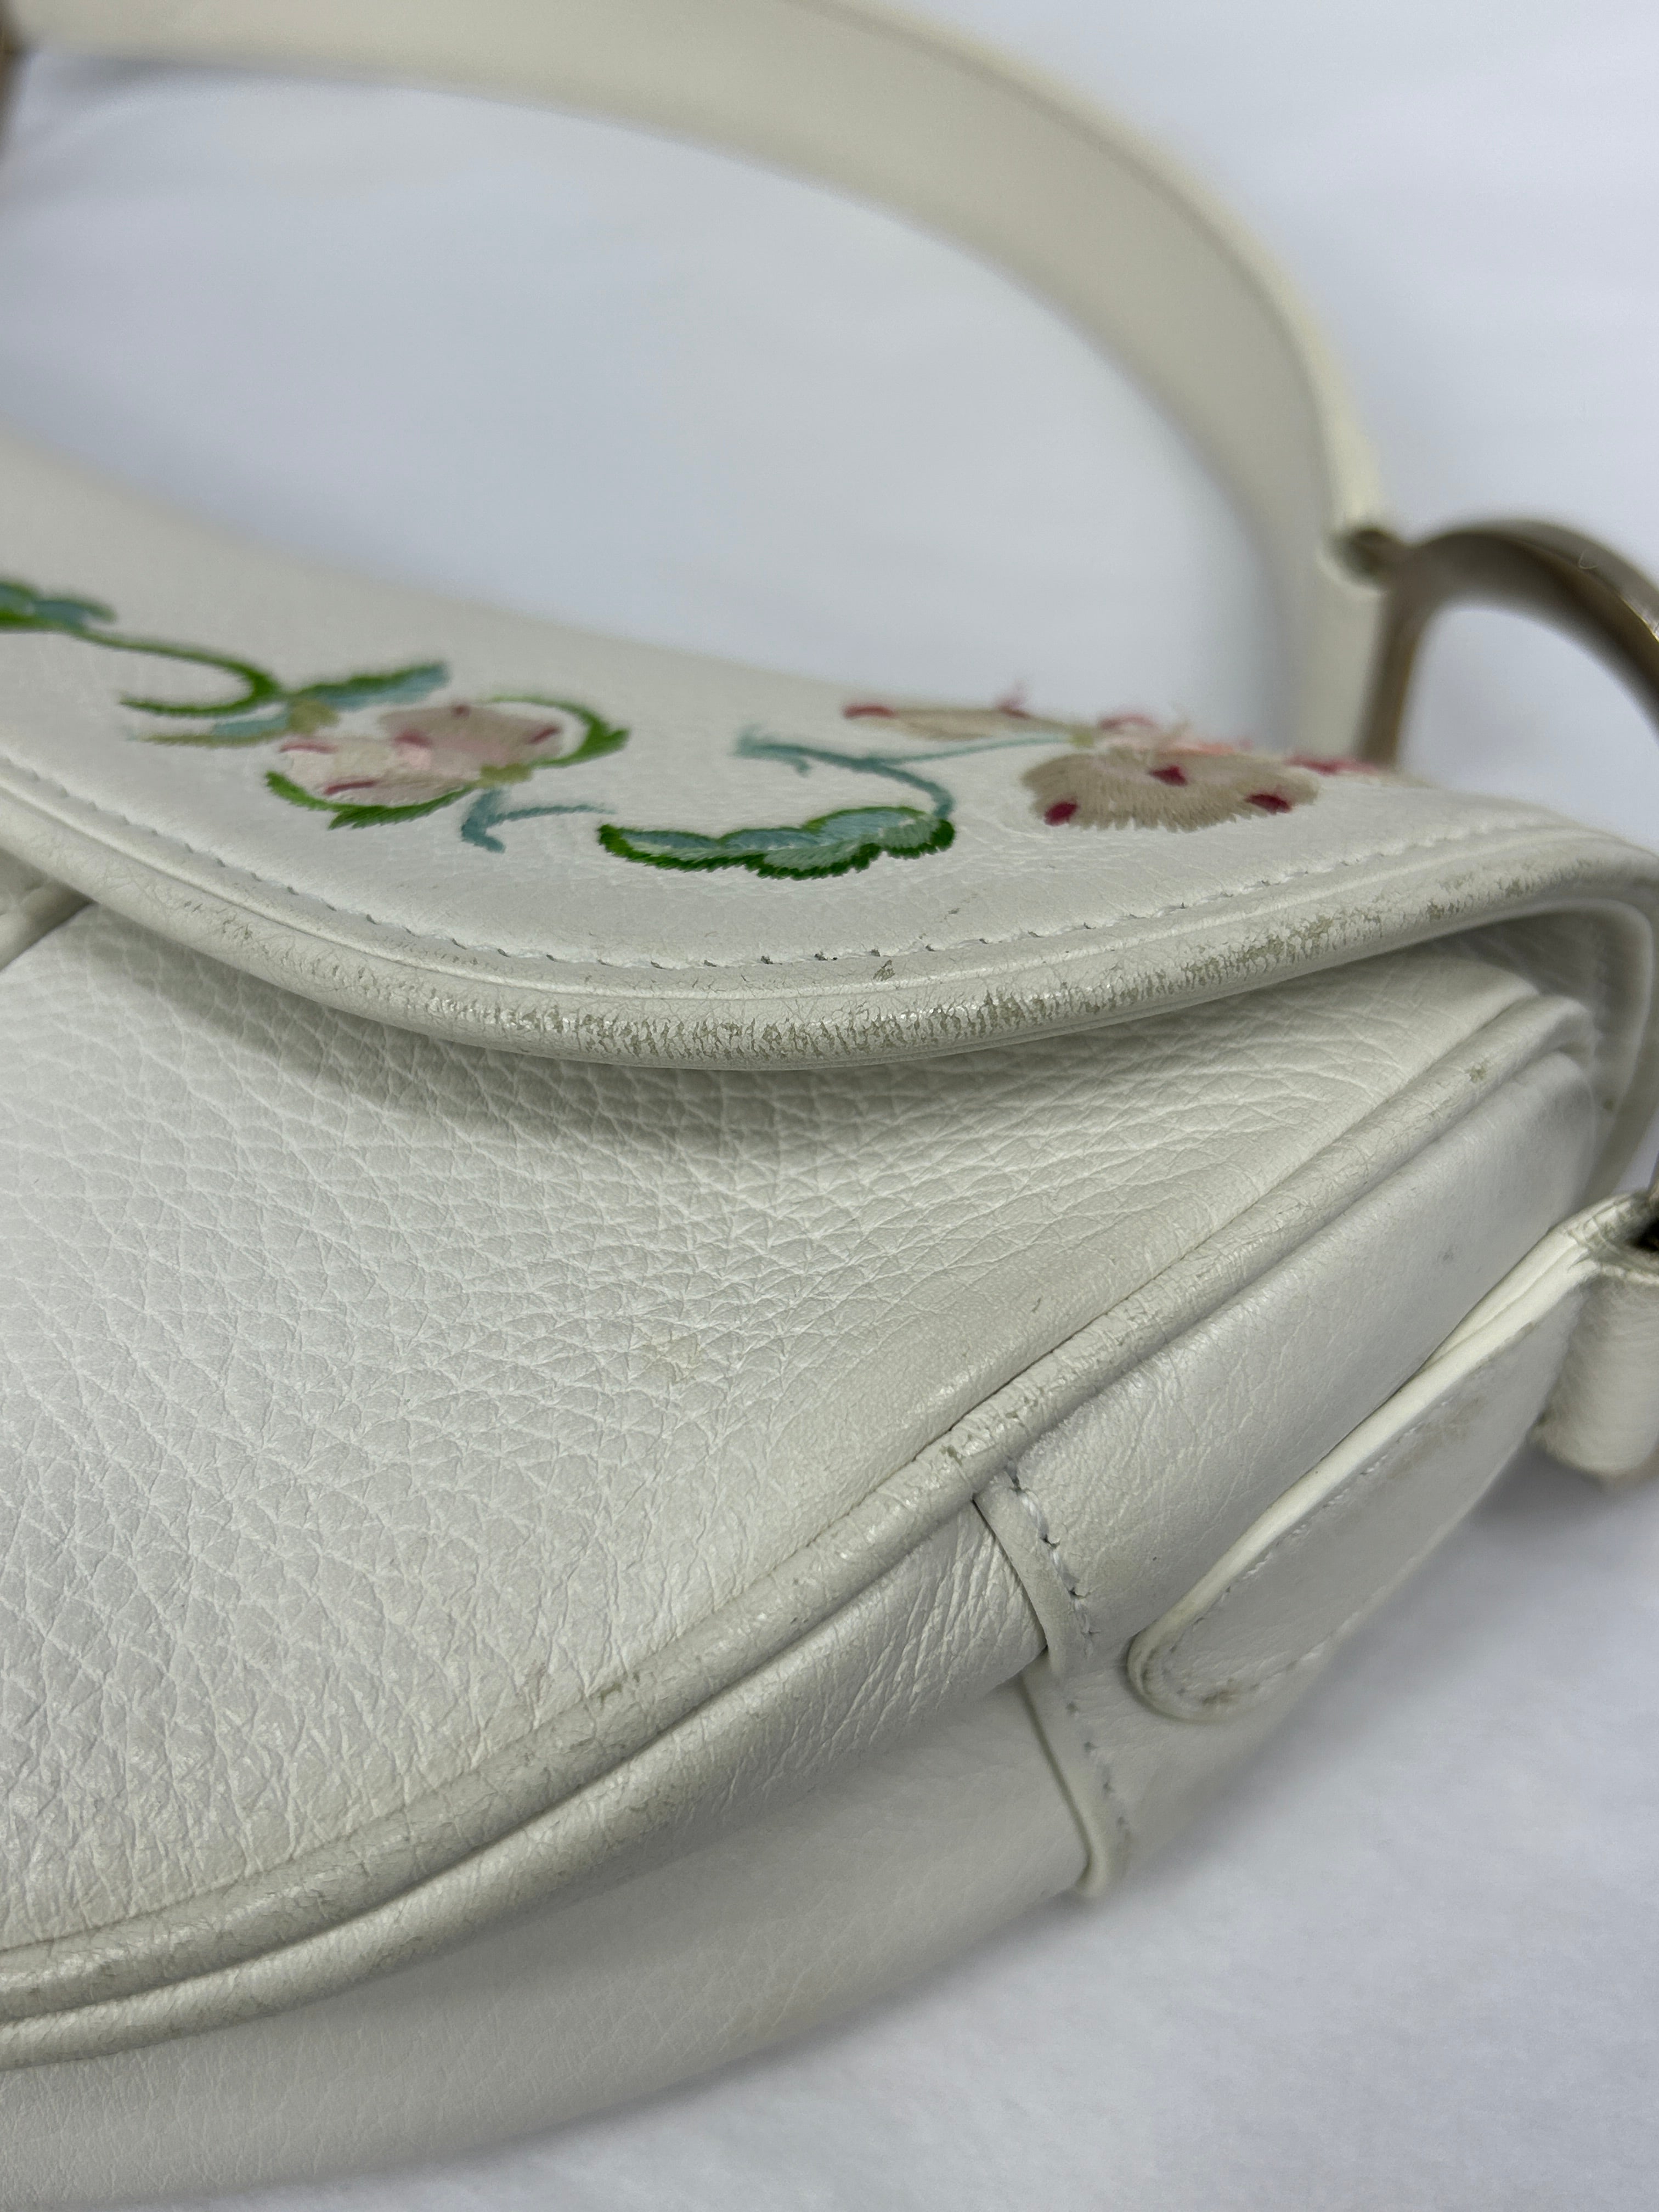 White Grained Calfskin Embroidered Romantic Flowers Saddle Bag w/SHW